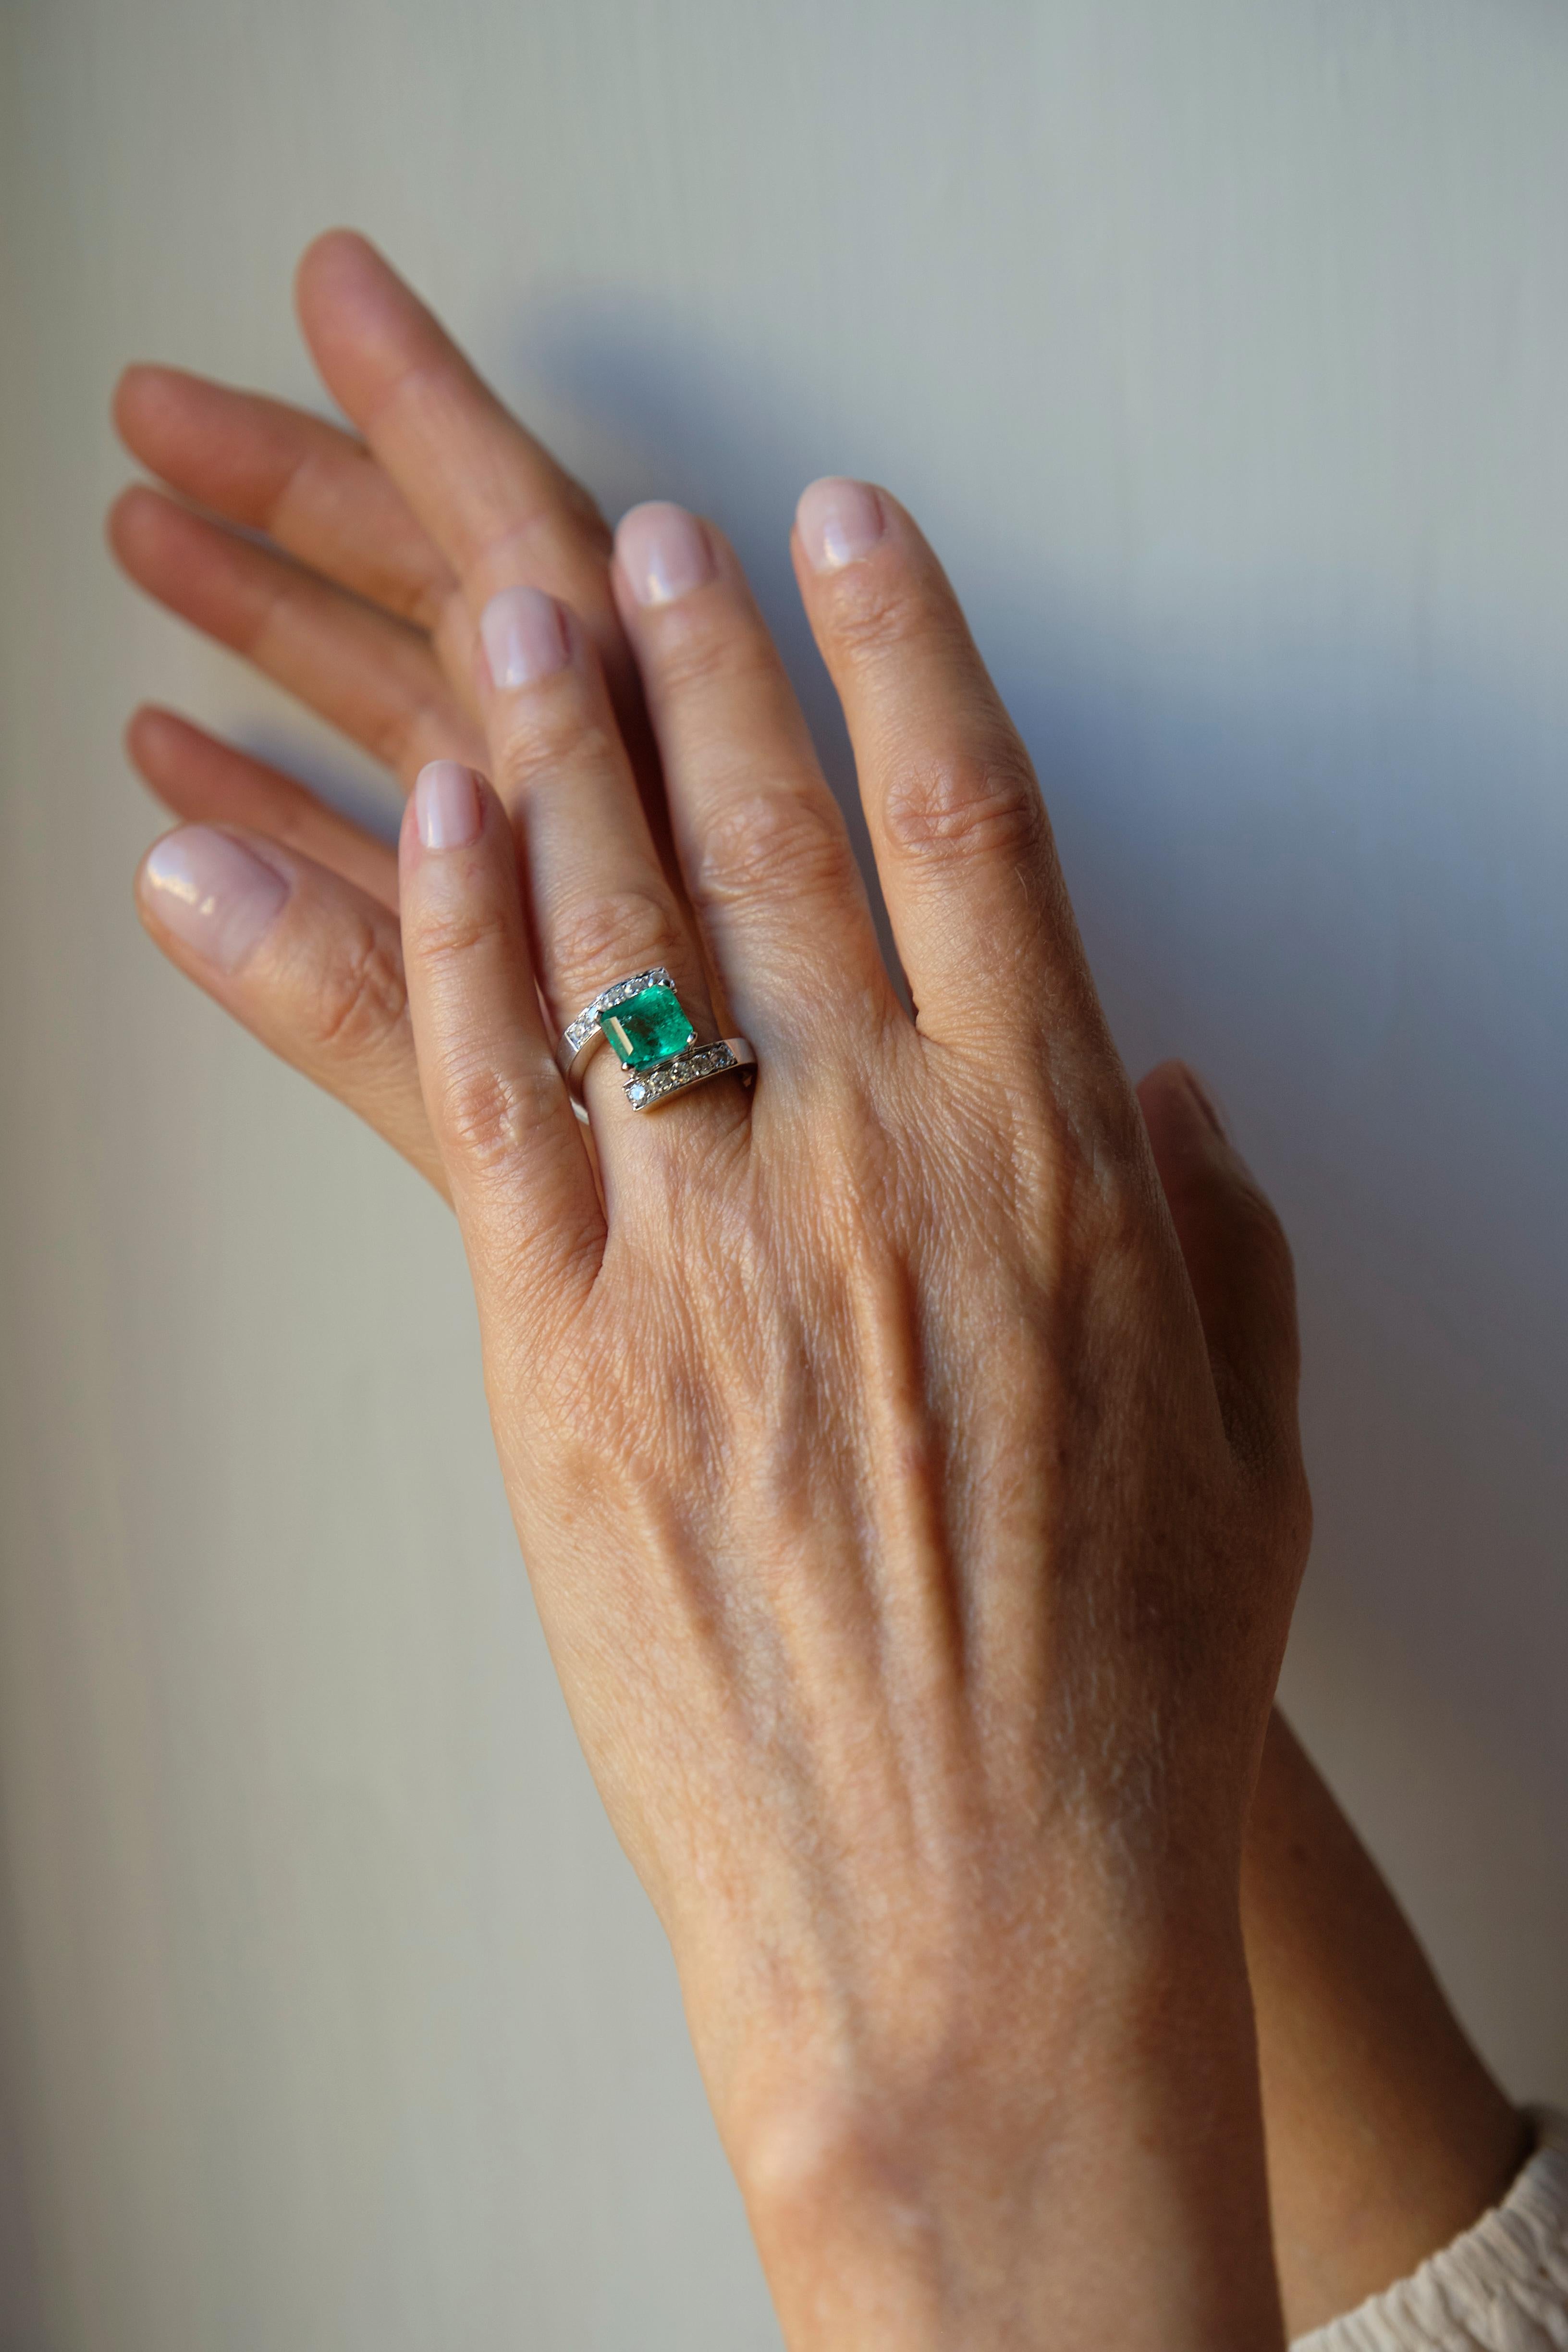 Elevate your style with the Rossella Ugolini Design Collection, featuring the IGN Certified 2.10 Carat Emerald 18Karat 0.56 Carat White Gold White Diamonds Cocktail Ring. This exquisite piece is a testament to craftsmanship, capturing the essence of